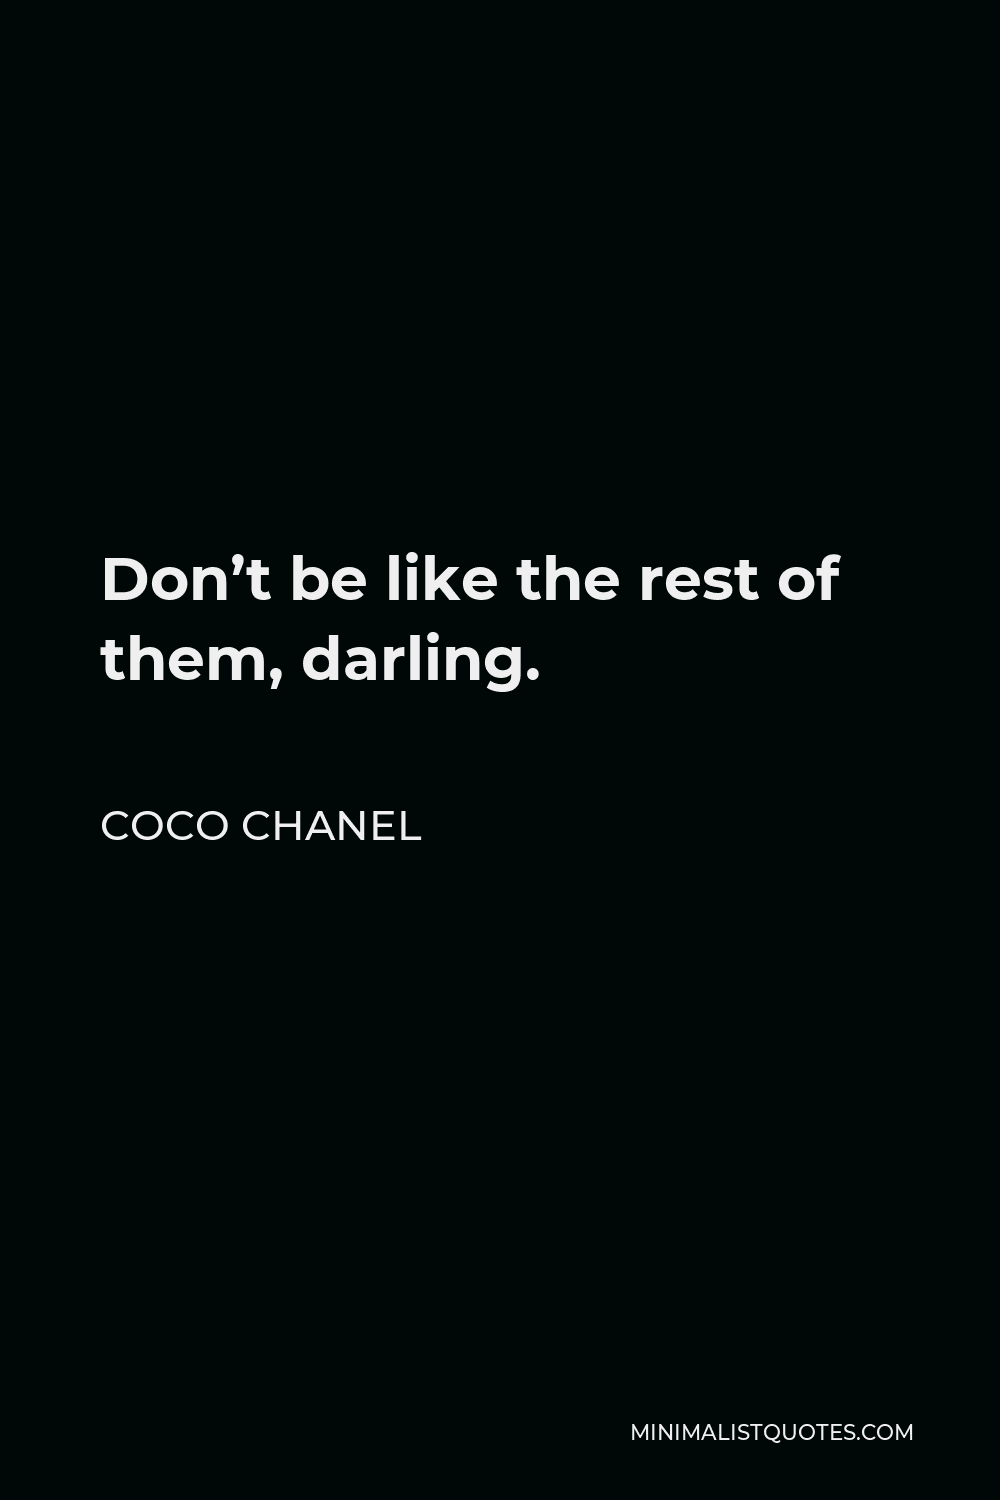 Coco Chanel Quote - Don’t be like the rest of them, darling.